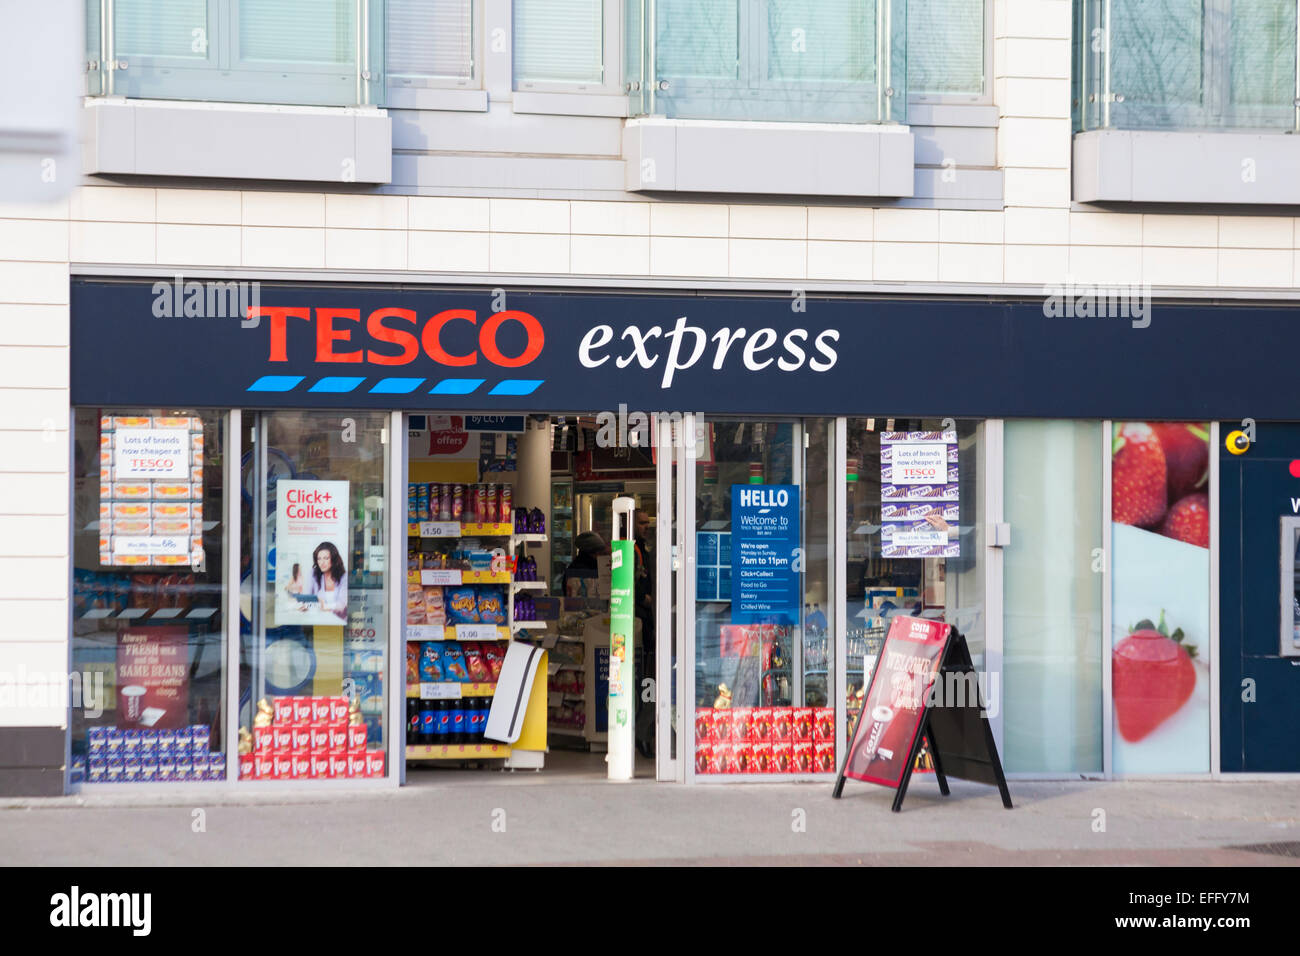 Tesco Express store, shop front exterior entrance, at Royal Victoria Dock, London, UK in February Stock Photo